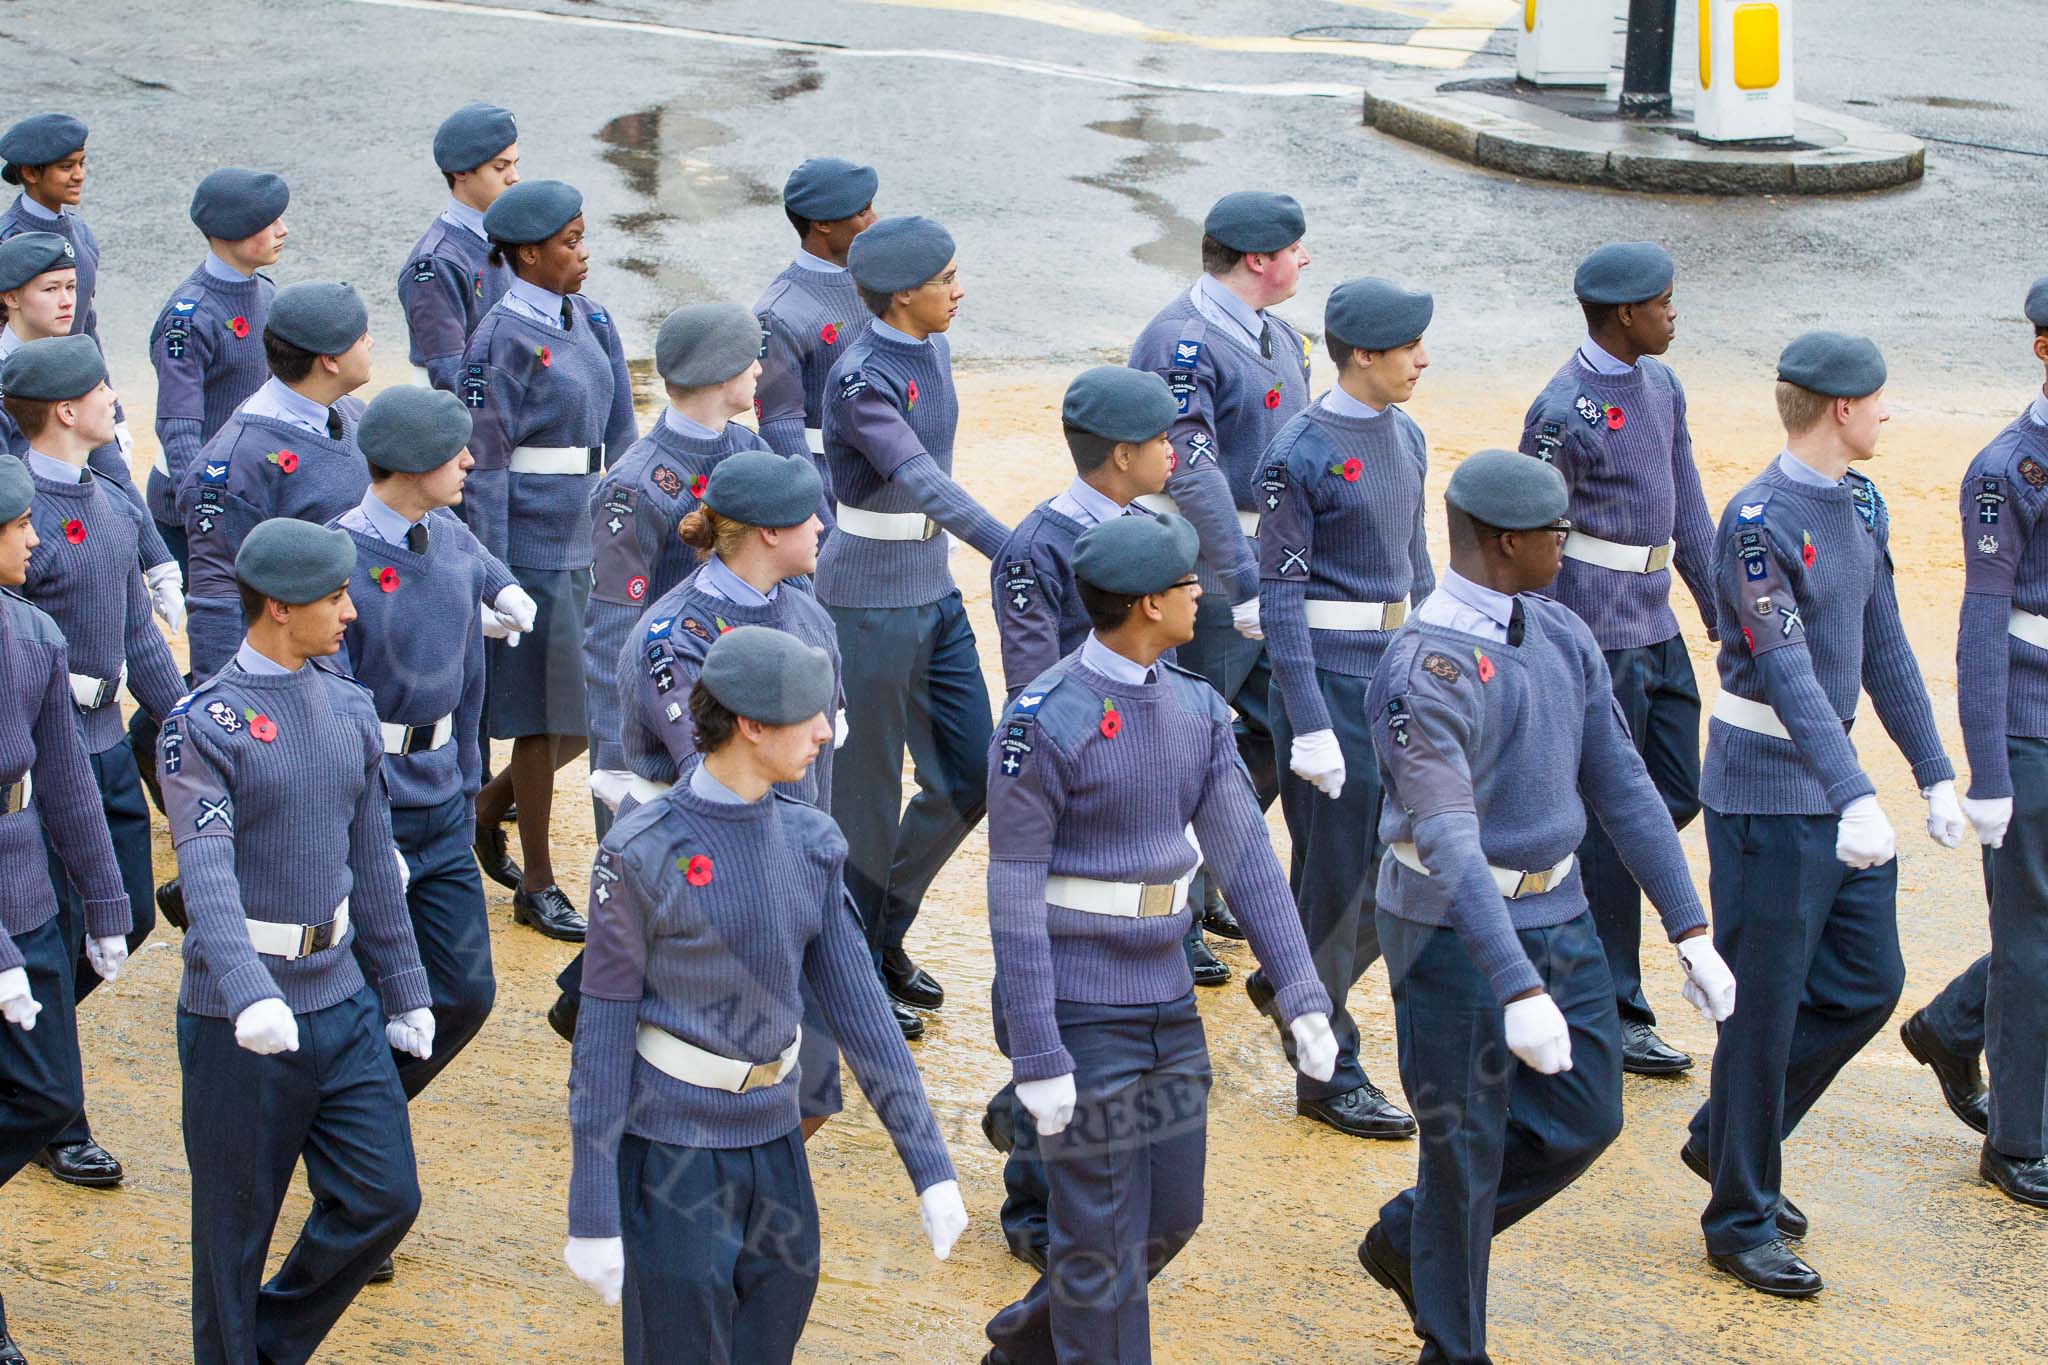 Lord Mayor's Show 2012: Entry 24 - Air Training Corps, the Air Cadets is the world's largest youth air training organisation..
Press stand opposite Mansion House, City of London,
London,
Greater London,
United Kingdom,
on 10 November 2012 at 11:10, image #400